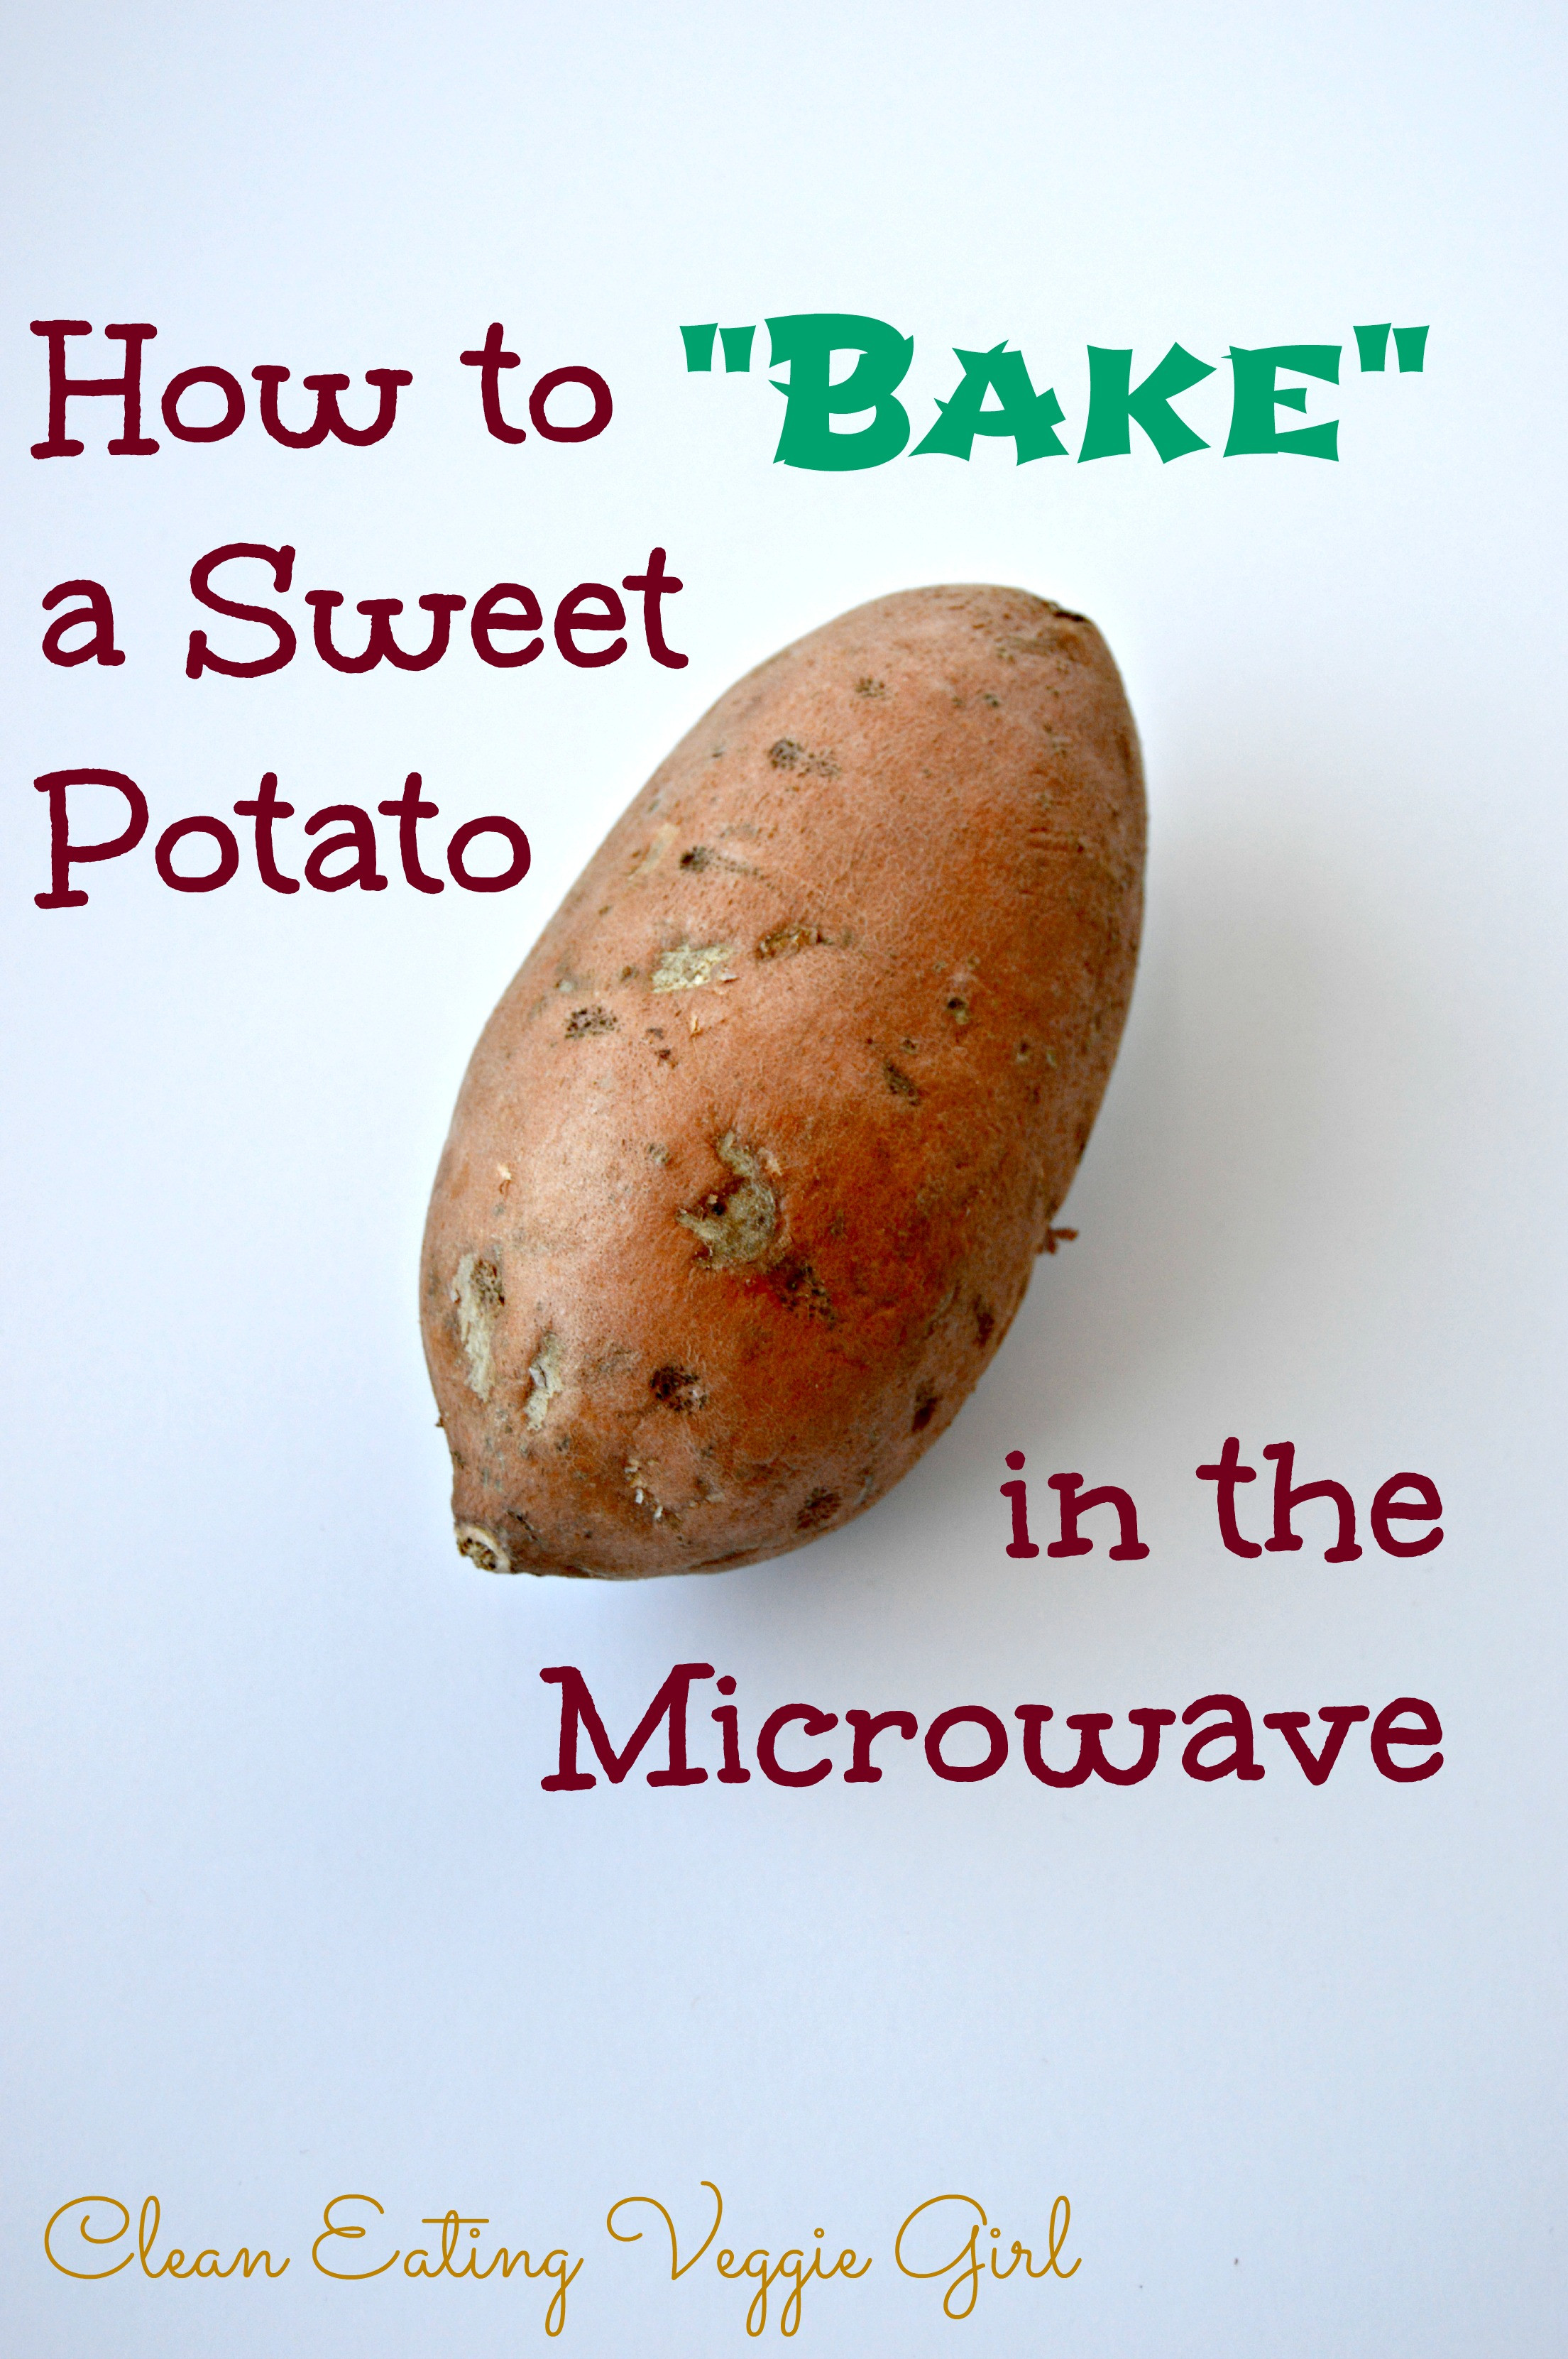 How To Make Baked Potato In Microwave
 How to Make a Baked Sweet Potato in the Microwave Clean